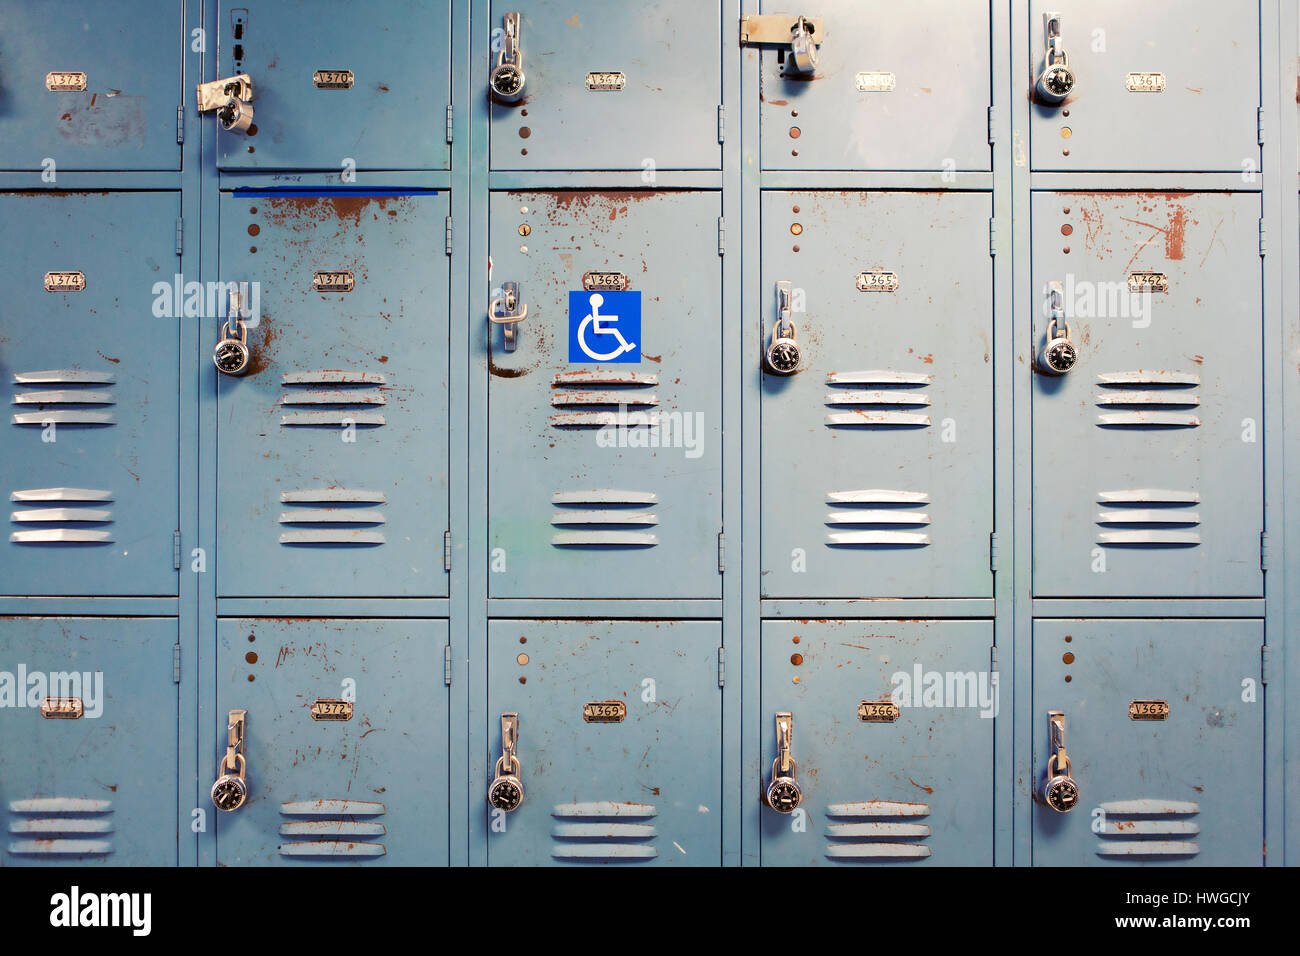 Wall lockers, one with handicap symbol. Stock Photo